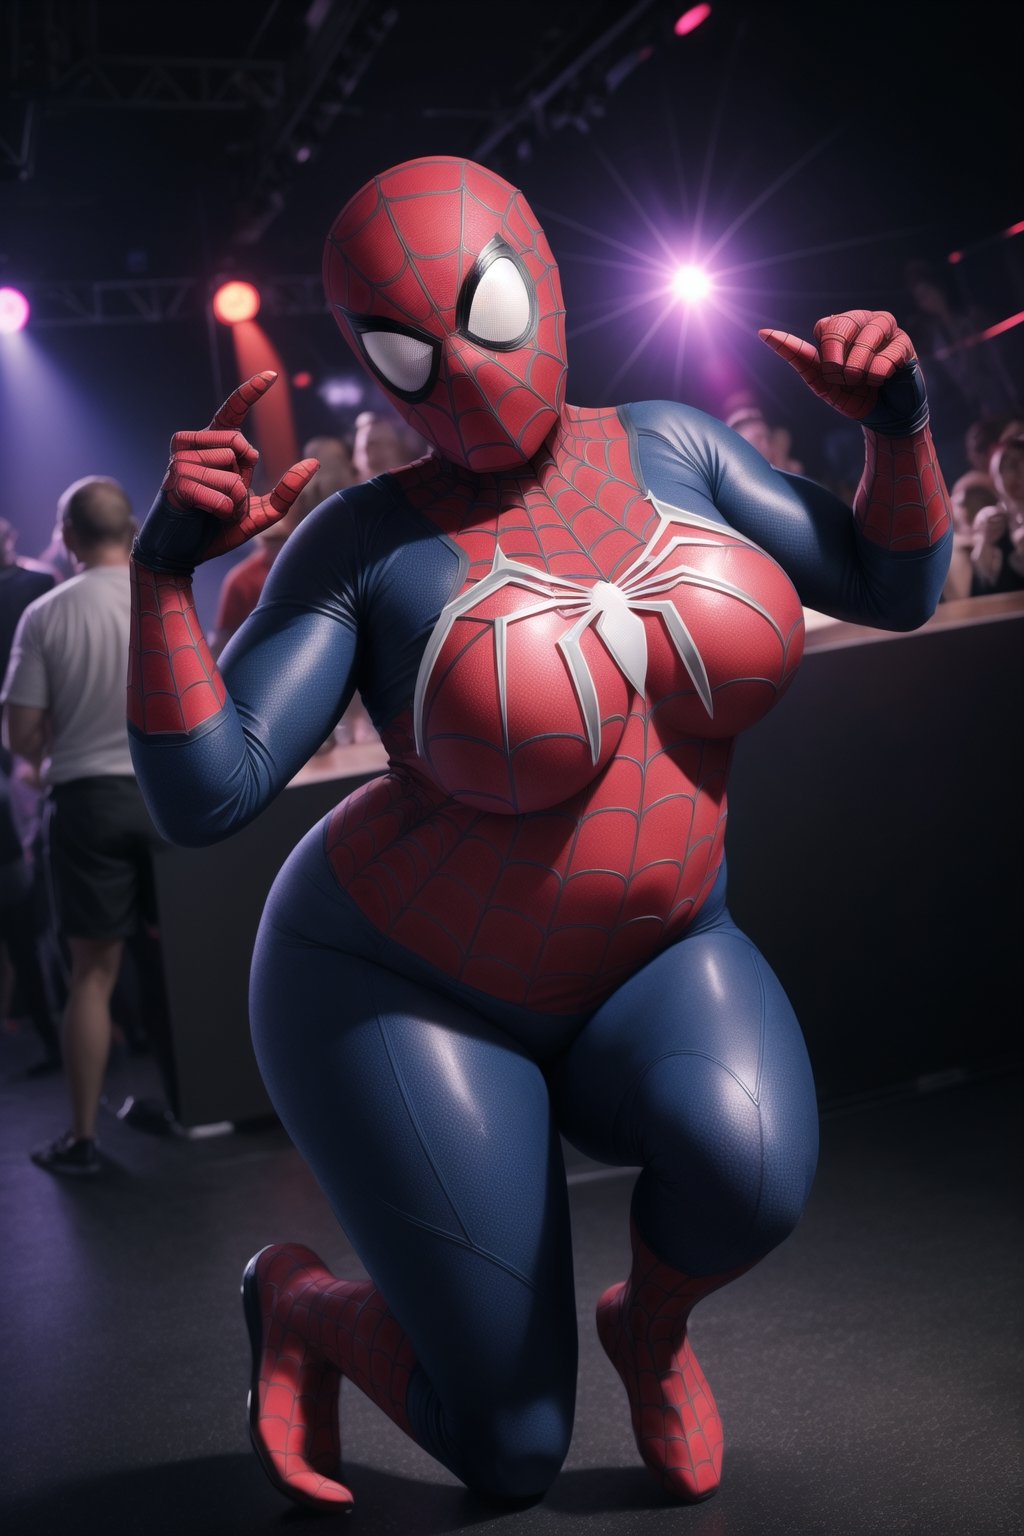 Solo, Spider-Man, Spider-Man, 1_girl, female, Age: 20 years Height: Medium  , indoors, provacative_pose, sexy,spider-man_costume, Spider-Man_suit, faceless, oversized_breasts, huge_boobs, chubby_female,perfect_hands, viewed_from_front, no_face, Spider-Man_mask, shaved_head, covered_face, covered_eyes, dancing, nightclub, night_club,  eyes_covered, hairless, no_hair, on_stage, full_body,spider-man_costume, chubby_female, weight_gain, fattening, overweight, plump, obese, obese_female,chubby_girl, perfect_hands,